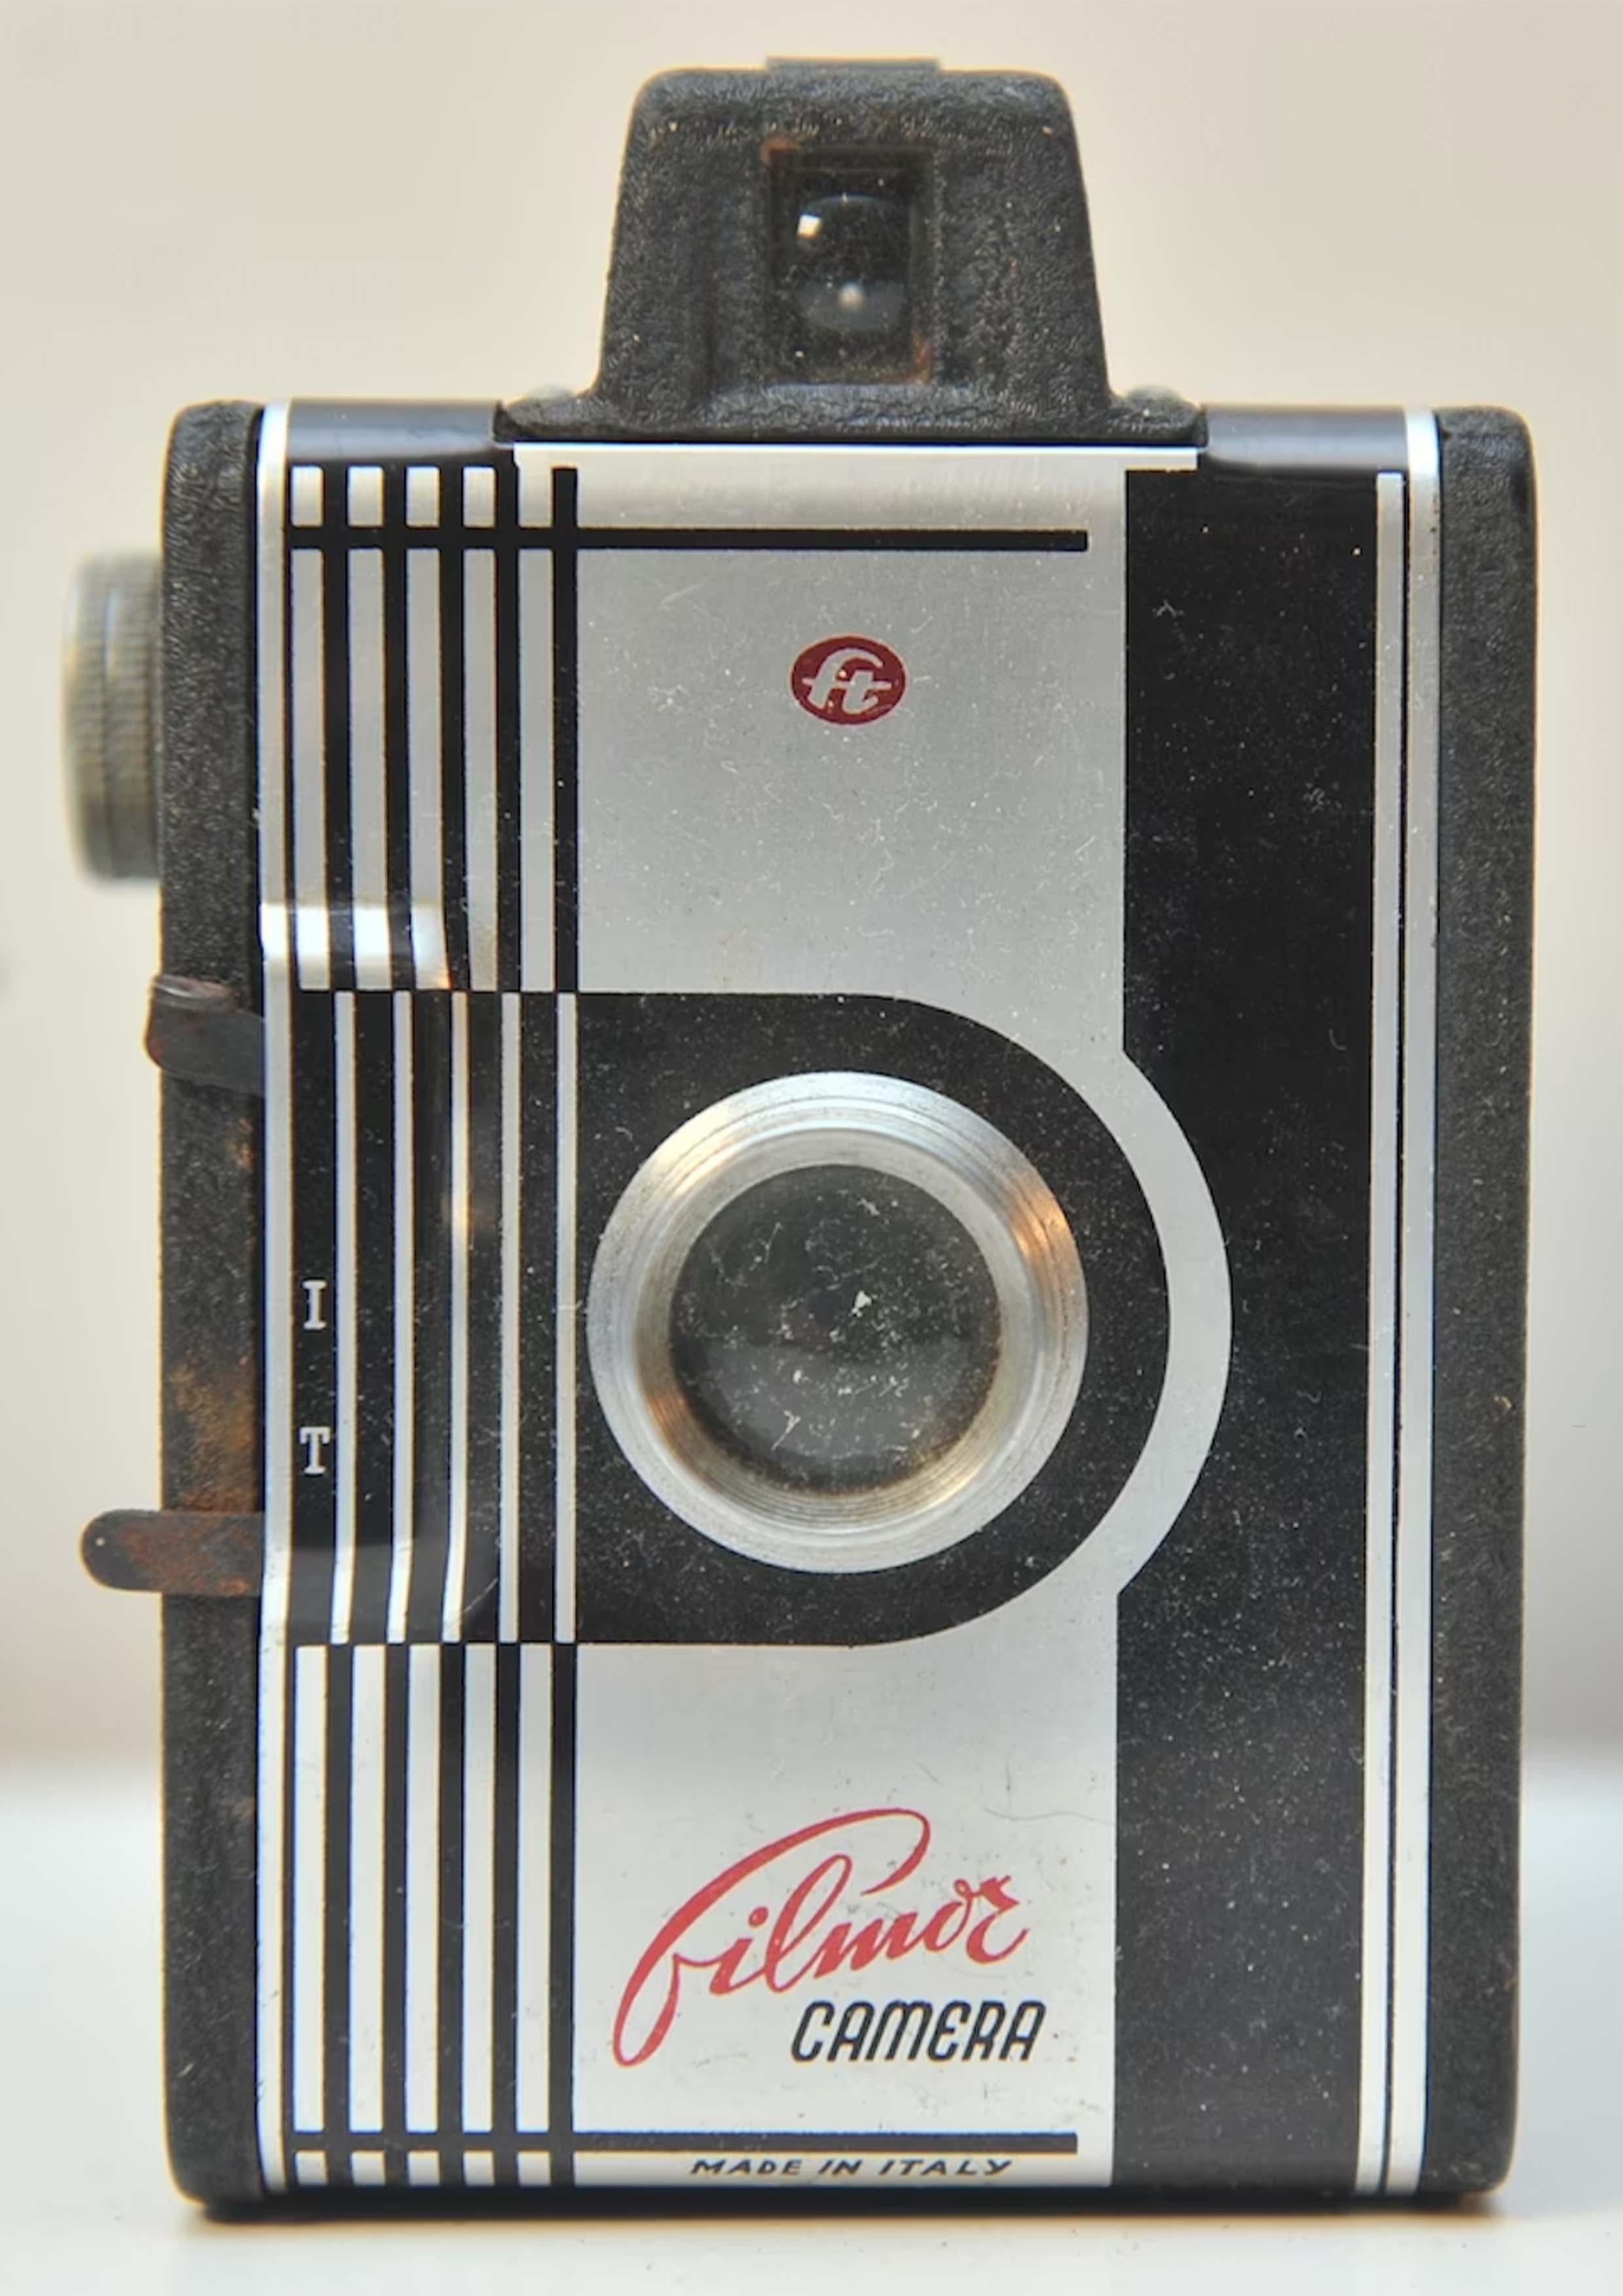 Filmor Camera 120 Film Box Eye-level Finder Camera With Achromatic F11 Lens Made by Fototecnica Torino of Italy 1950's


The Filmor Camera was a box camera, made by Fototecnica Torino. It made 6x9cm exposures on type No. 120 rollfilm. It had an